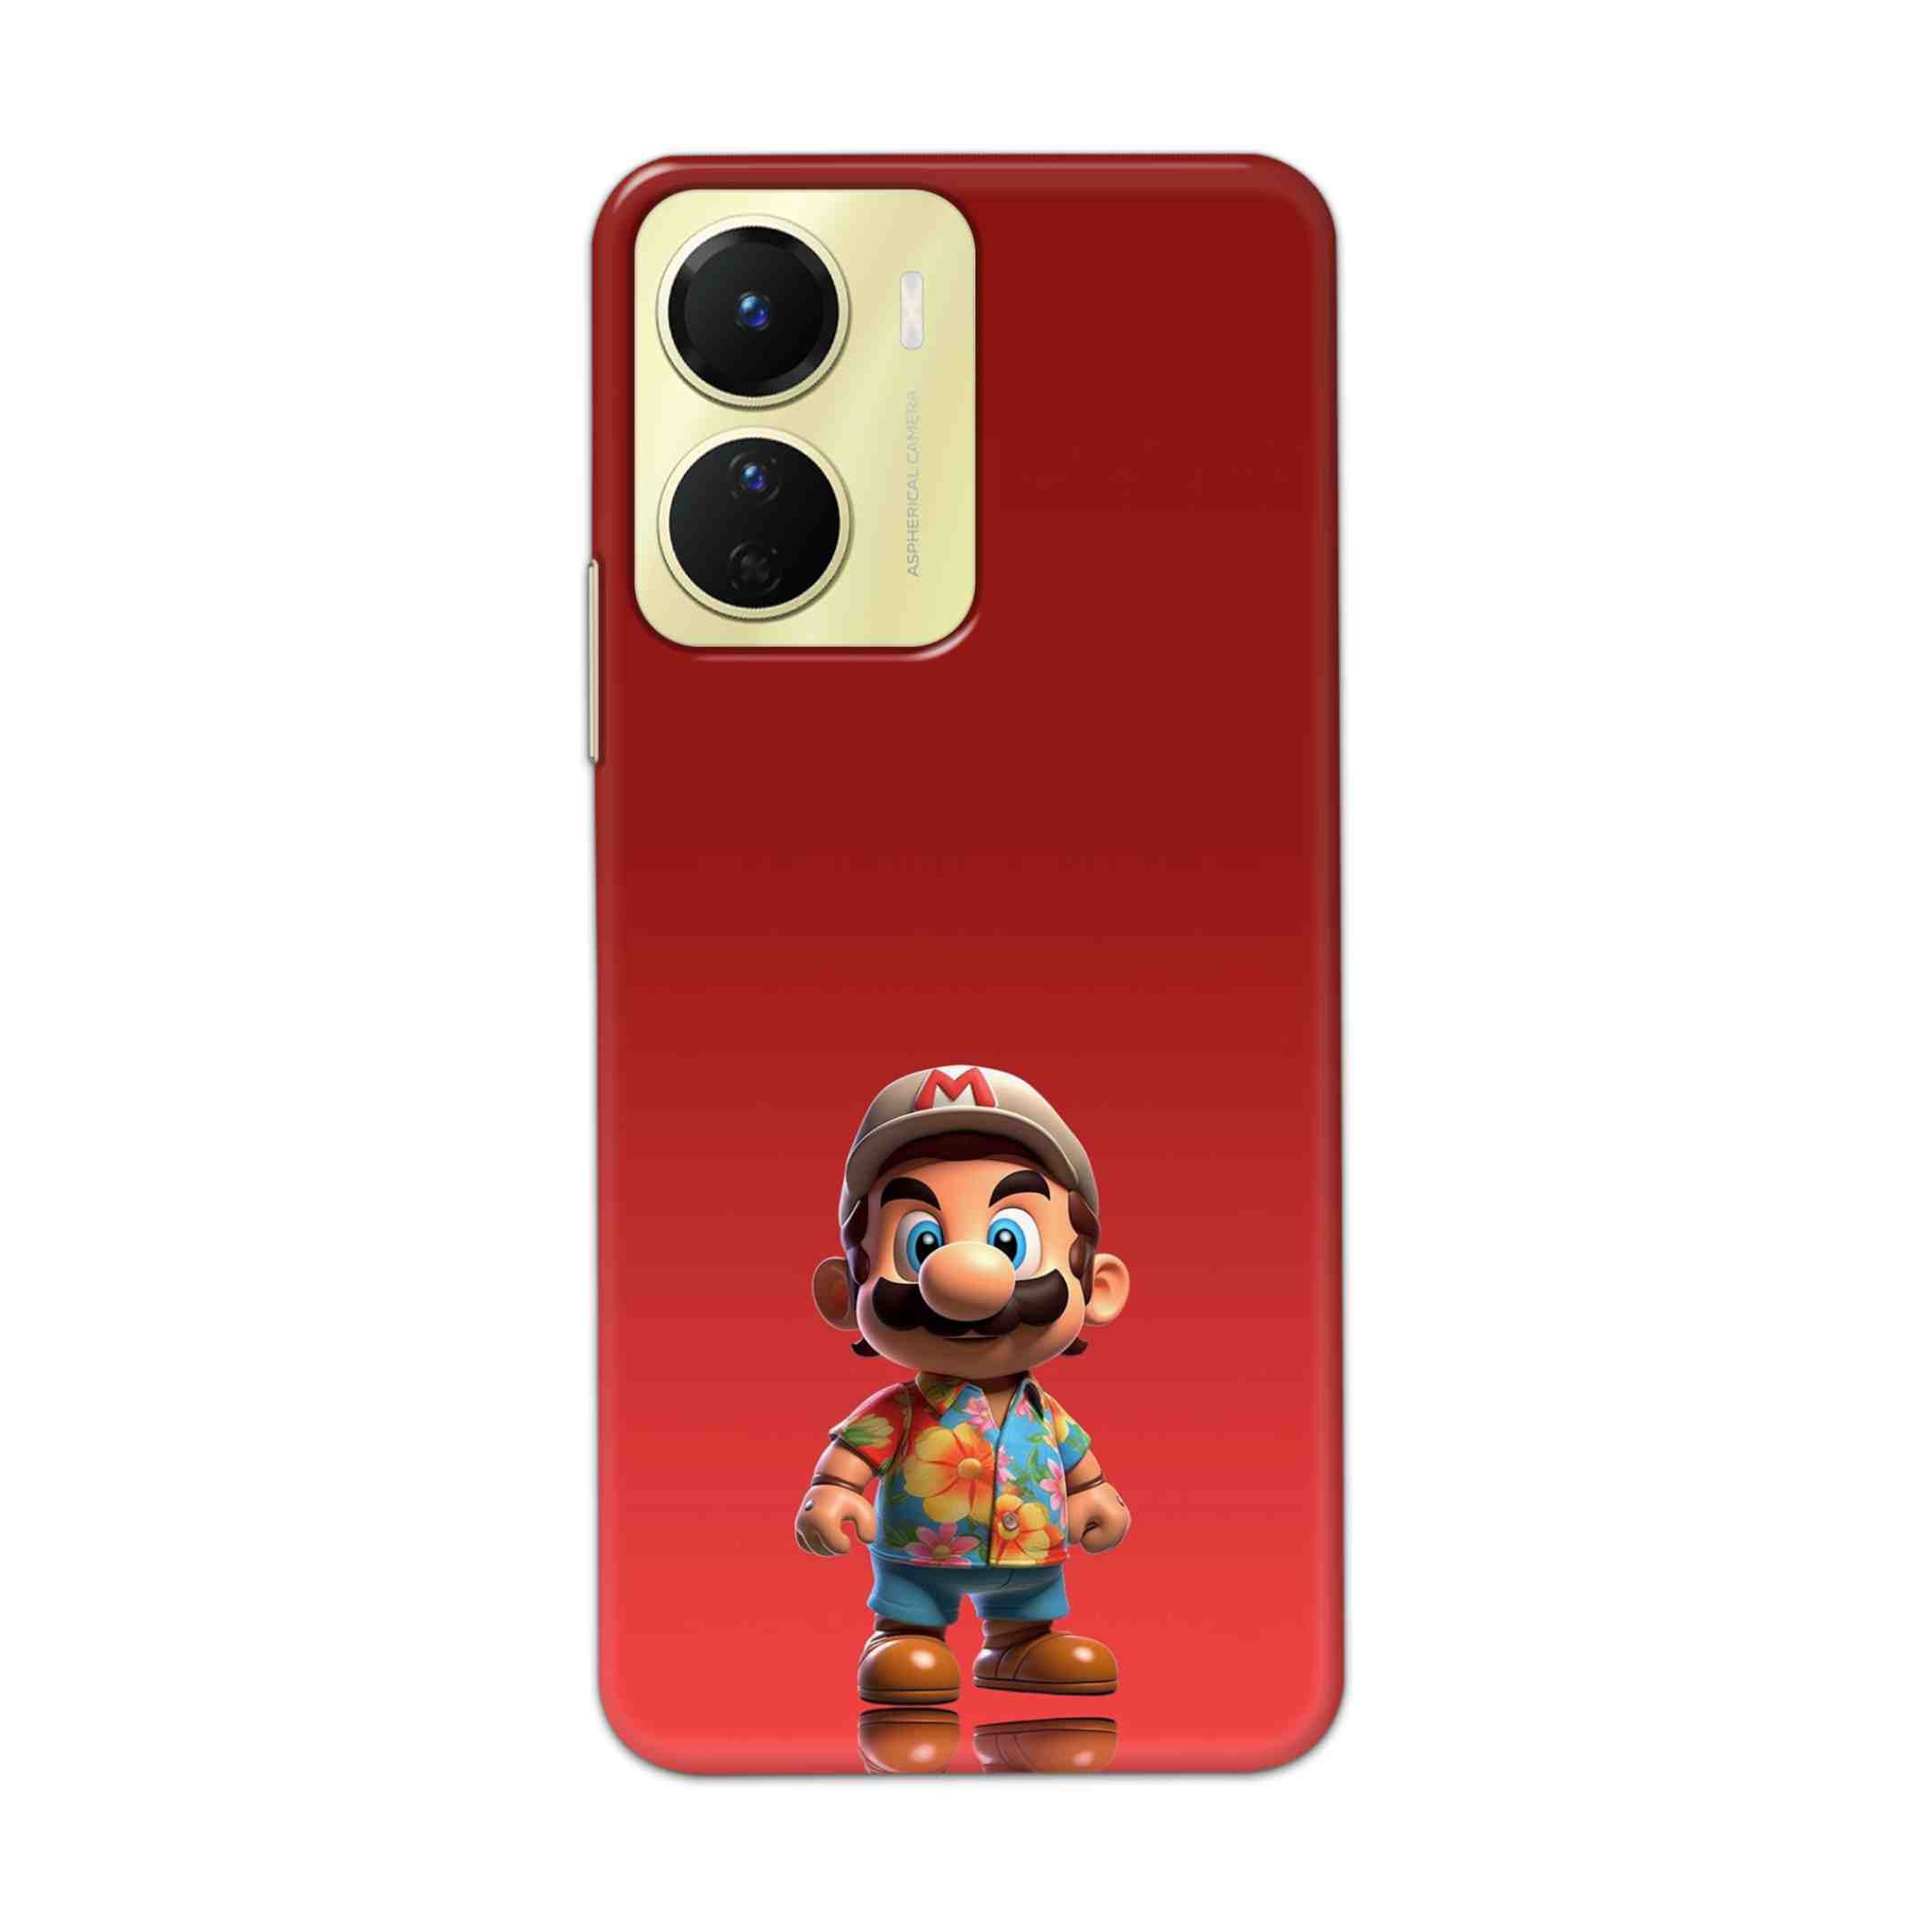 Buy Mario Hard Back Mobile Phone Case Cover For Vivo Y16 Online